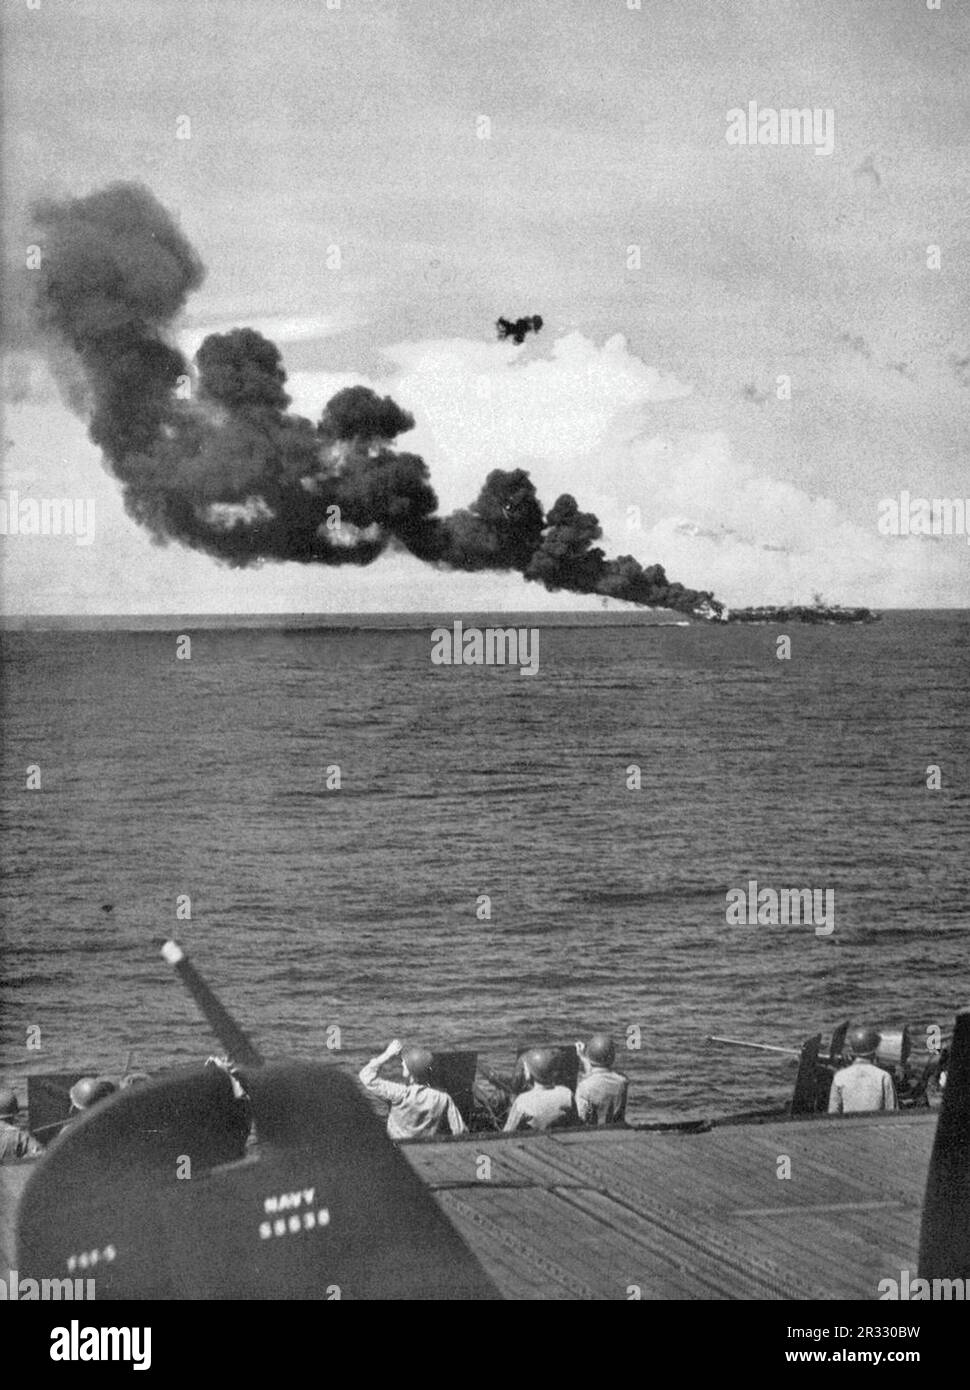 The U.S. Navy light aircraft carrier USS Belleau Wood (CVL-24) burning aft after she was hit by a Kamikaze, while operating off Luzon, Philippines, on 30 October 1944. Members of the Marine Detachment on board USS Enterprise (CV-6) shield their eyes from the sun as they scan the skies for kamikaze aircraft diving out of the sun. In the foreground is the tail of a Grumman F6F-5 Hellcat of Fighting Squadron 20 (VF-20). Stock Photo